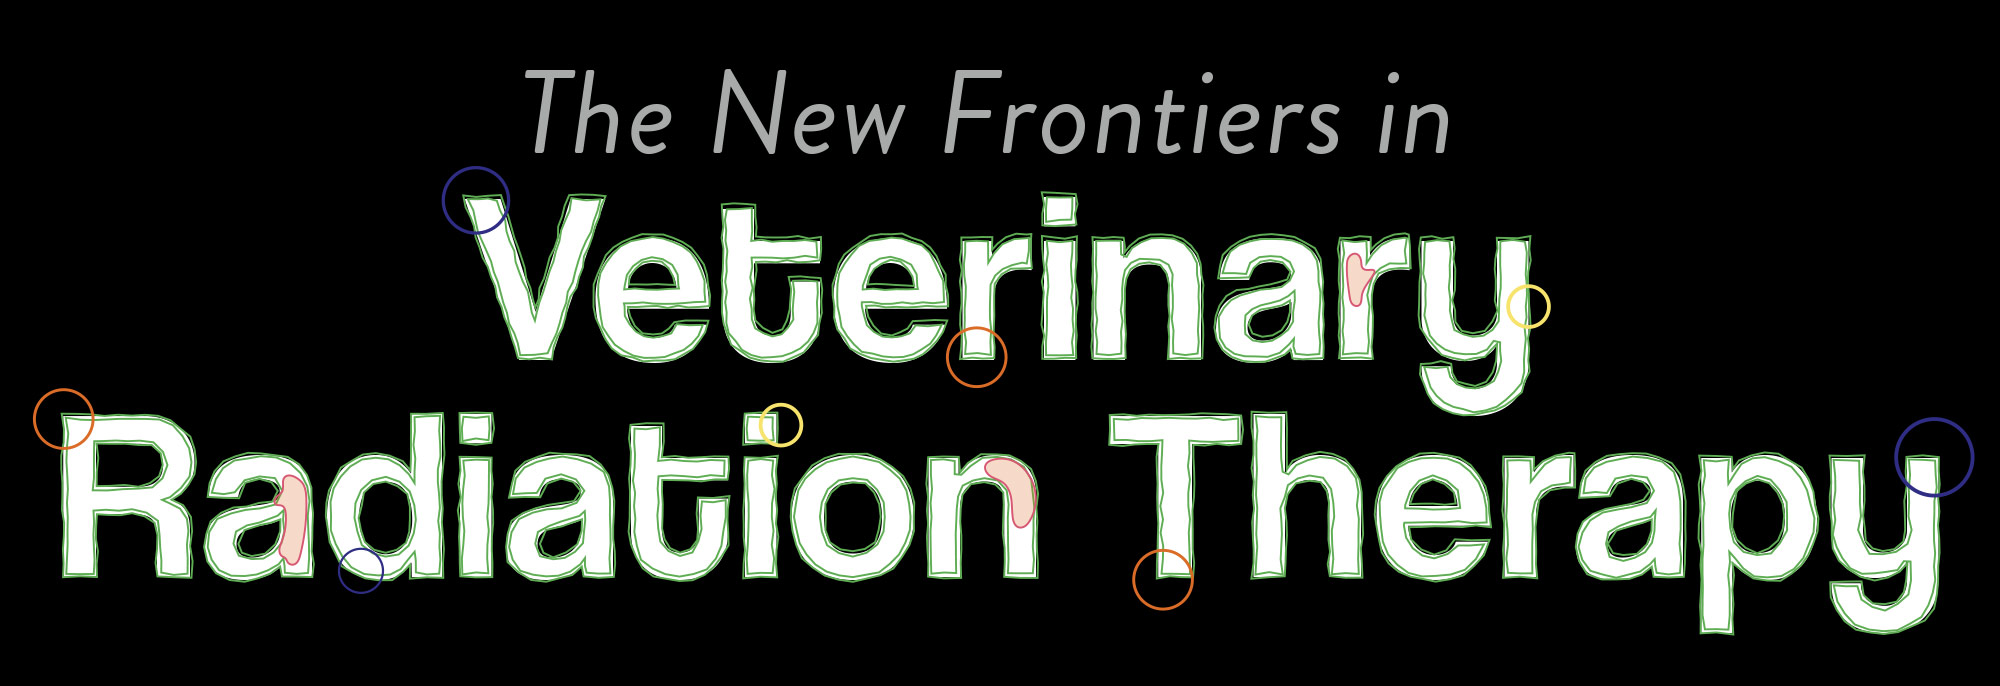 The New Frontiers in Veterinary Radiation Therapy